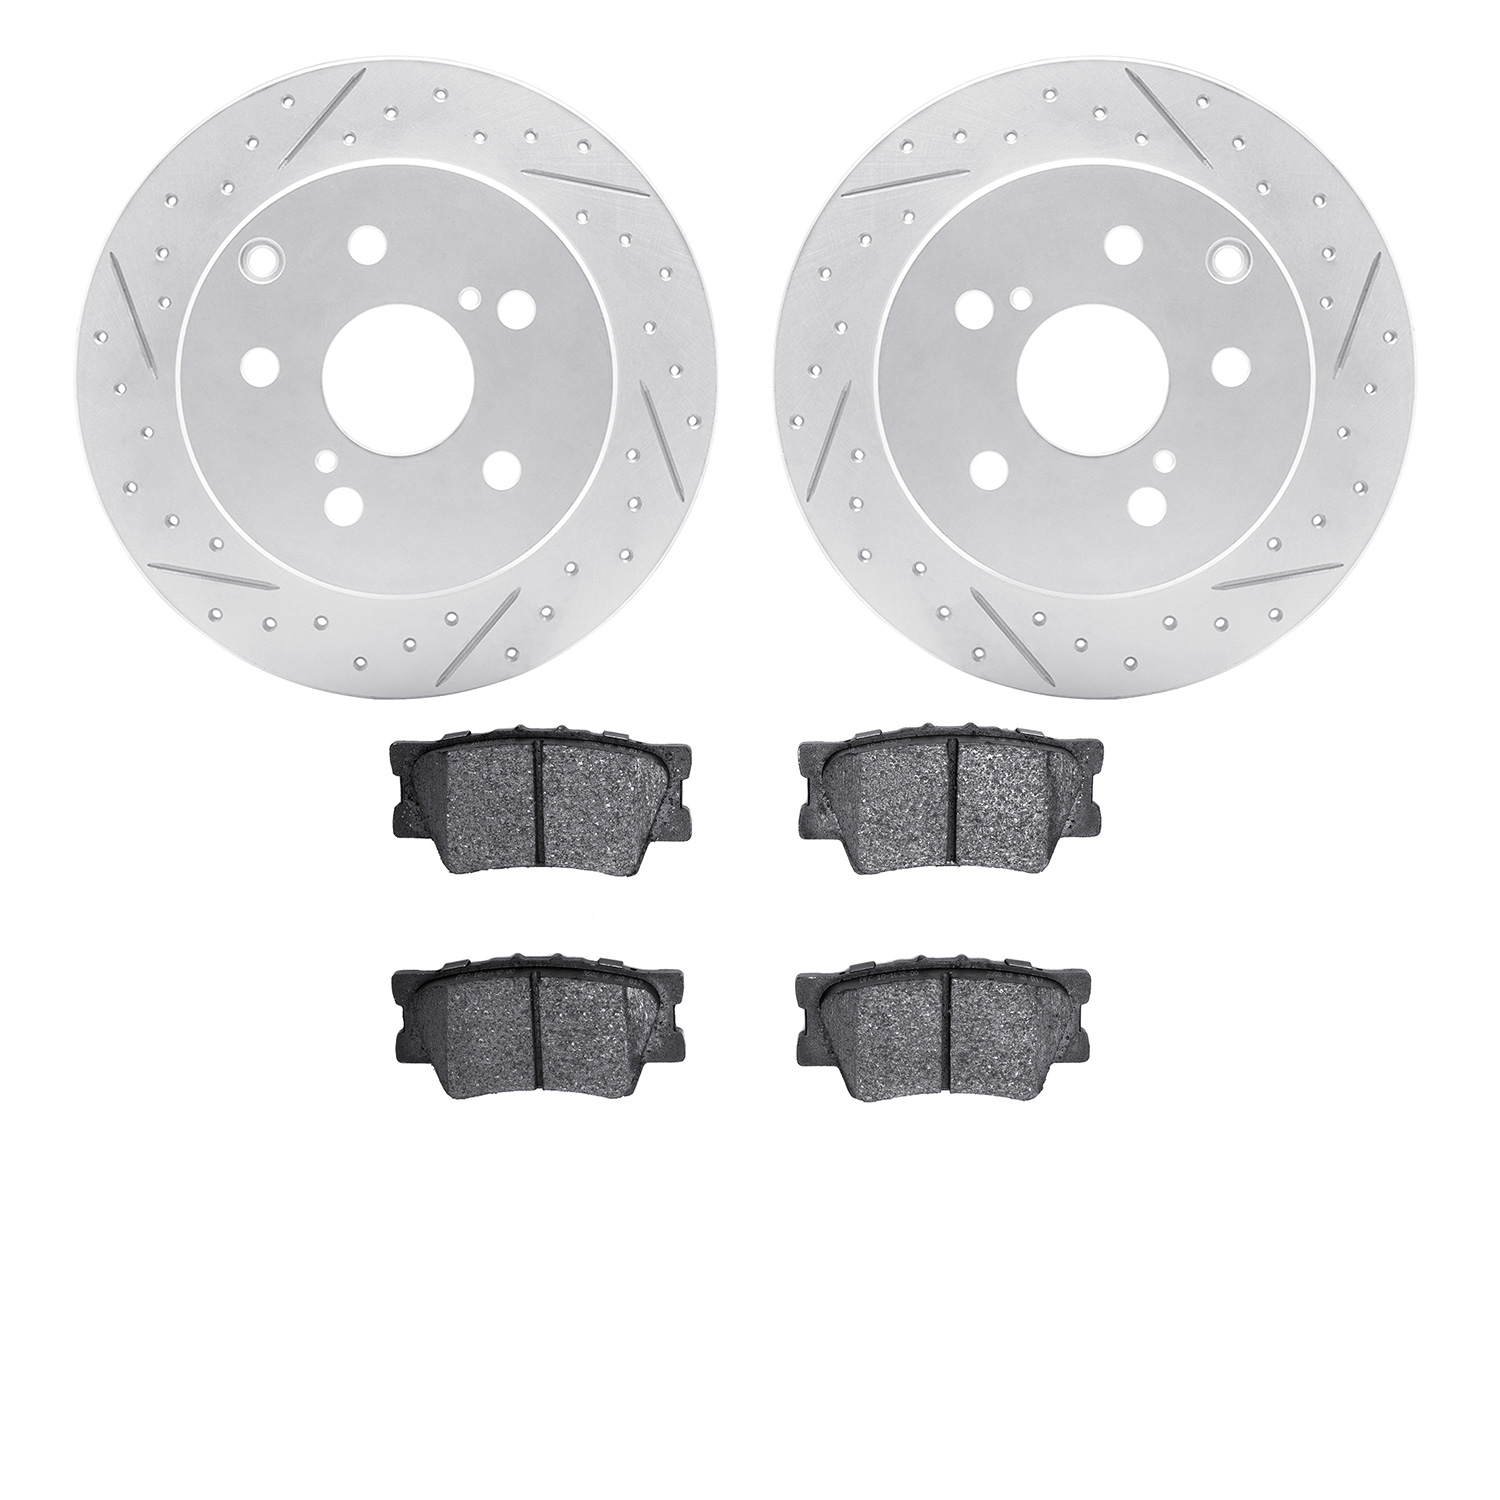 2502-76177 Geoperformance Drilled/Slotted Rotors w/5000 Advanced Brake Pads Kit, 2006-2018 Lexus/Toyota/Scion, Position: Rear